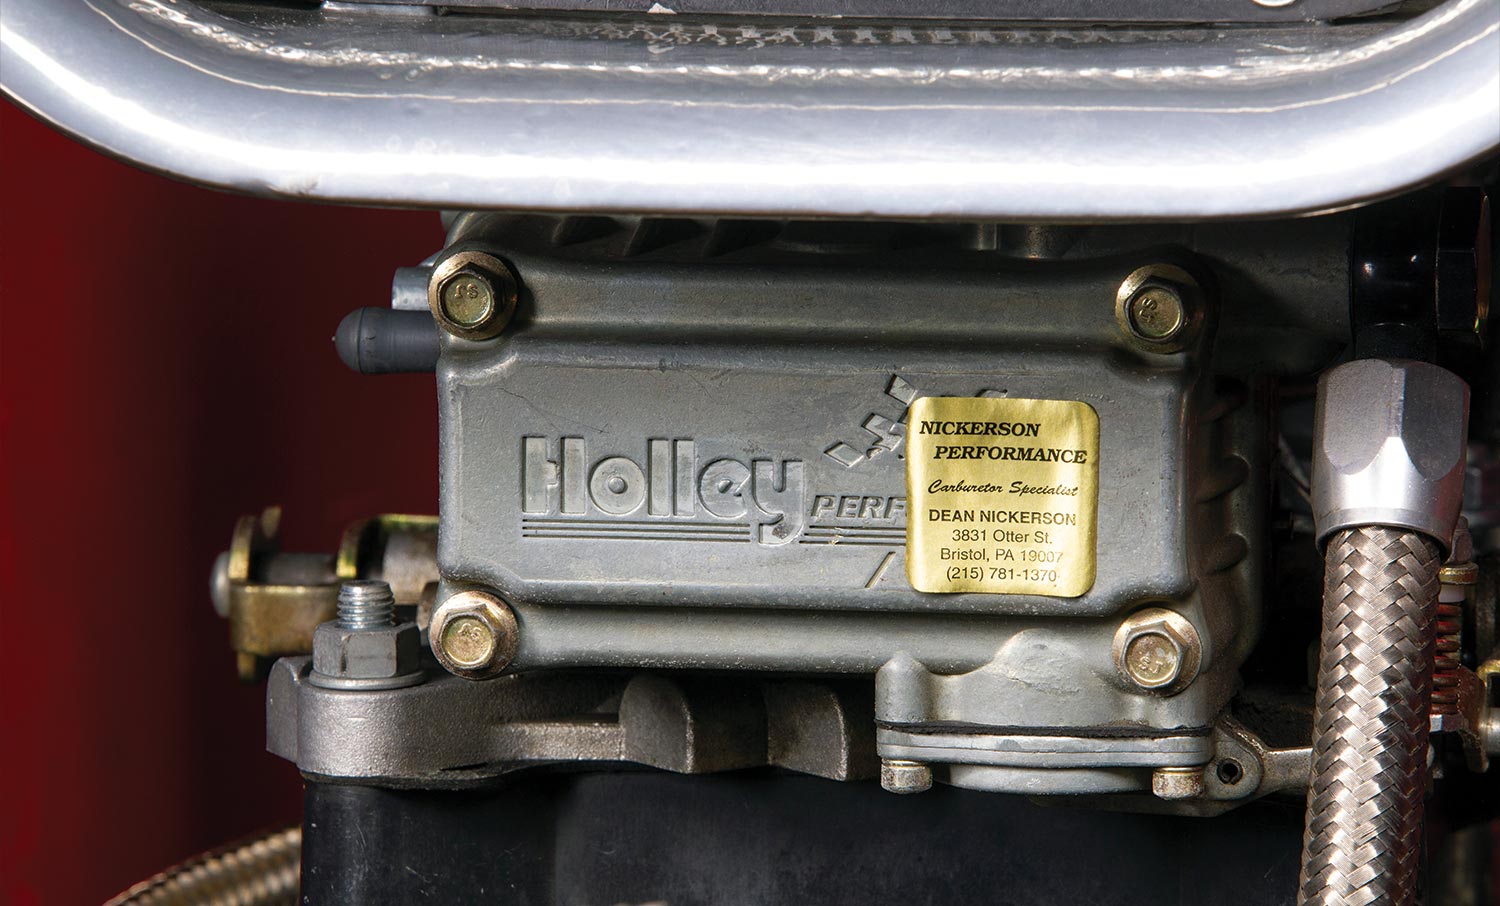 close view of a Holley performance part on the '55 Chevy gasser